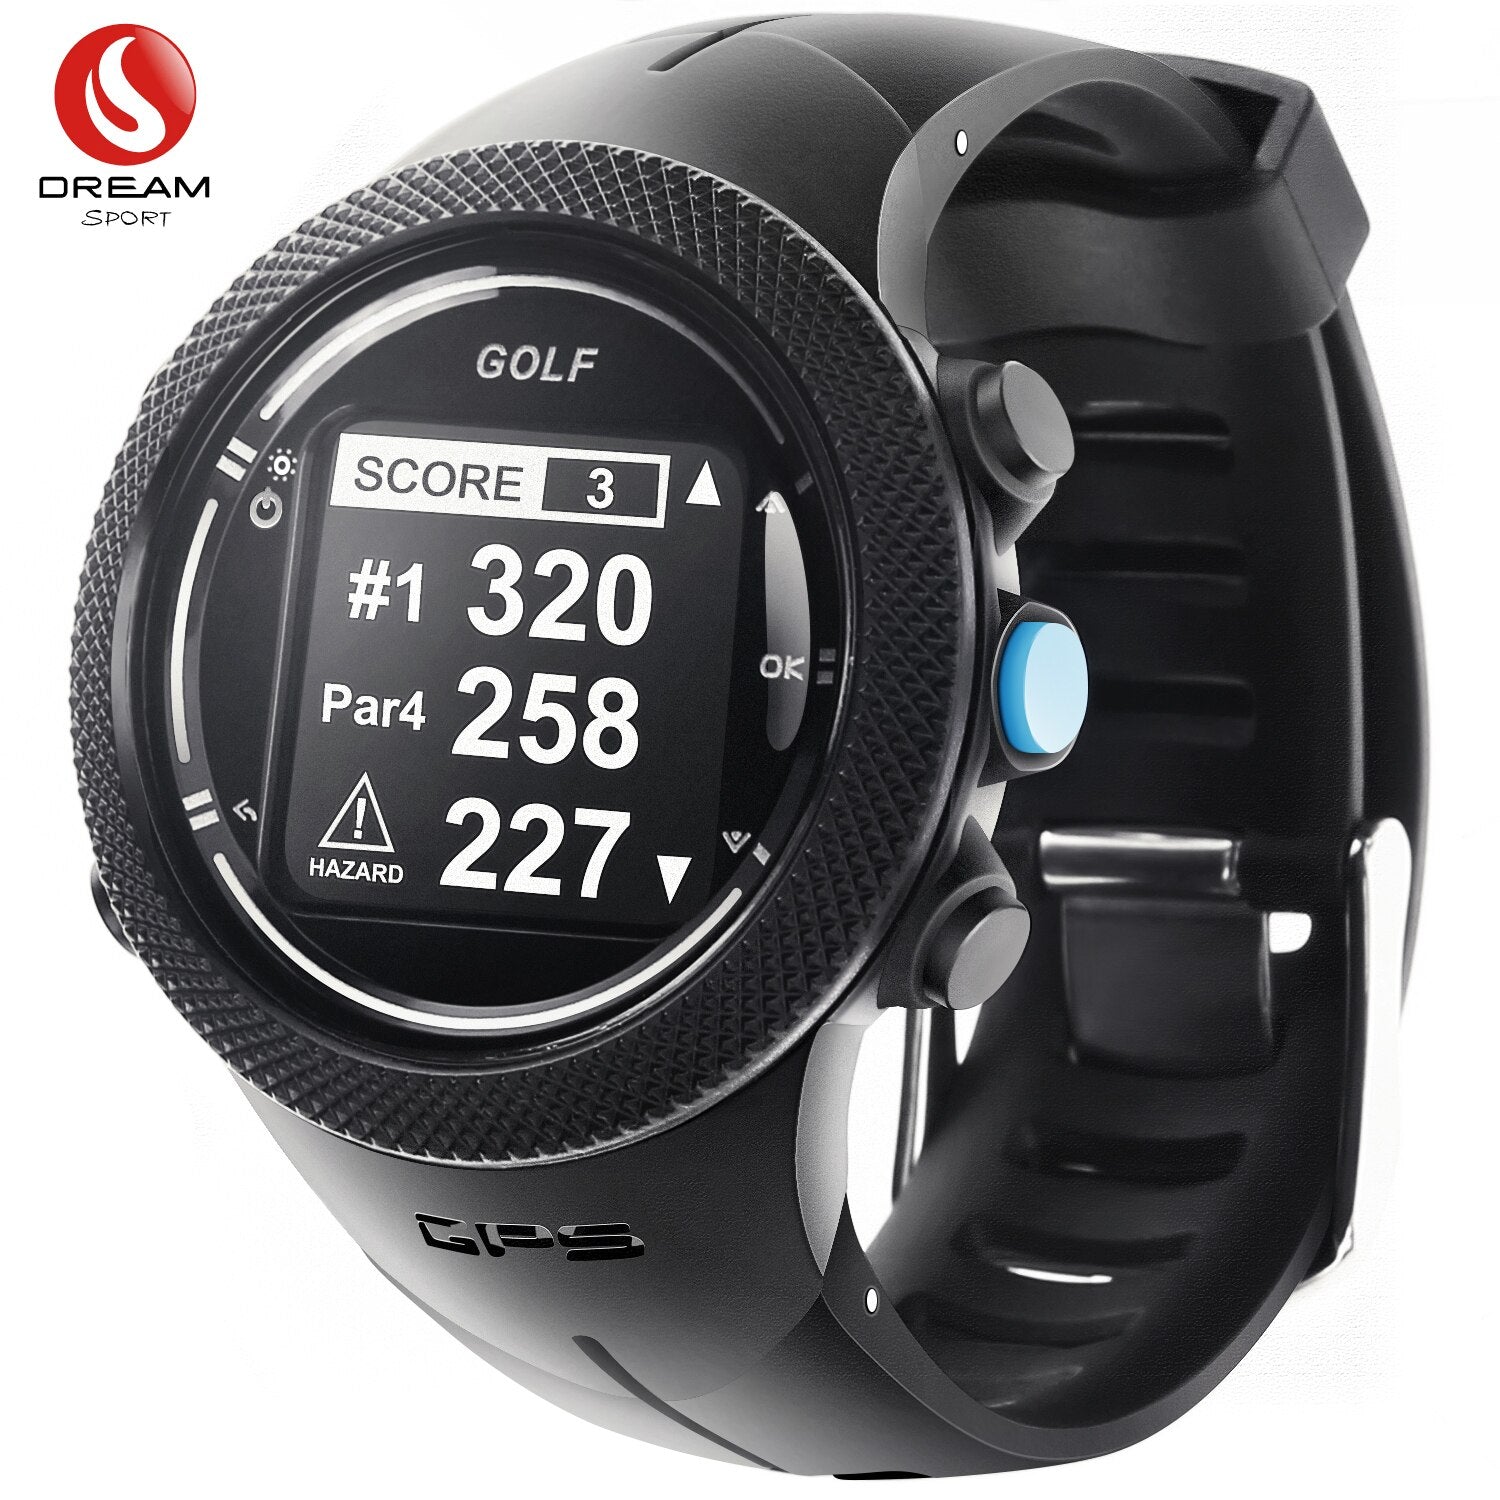 DREAM SPORT GPS Golf-3  Watch  Devices Golf Course Preloaded Rangefinders